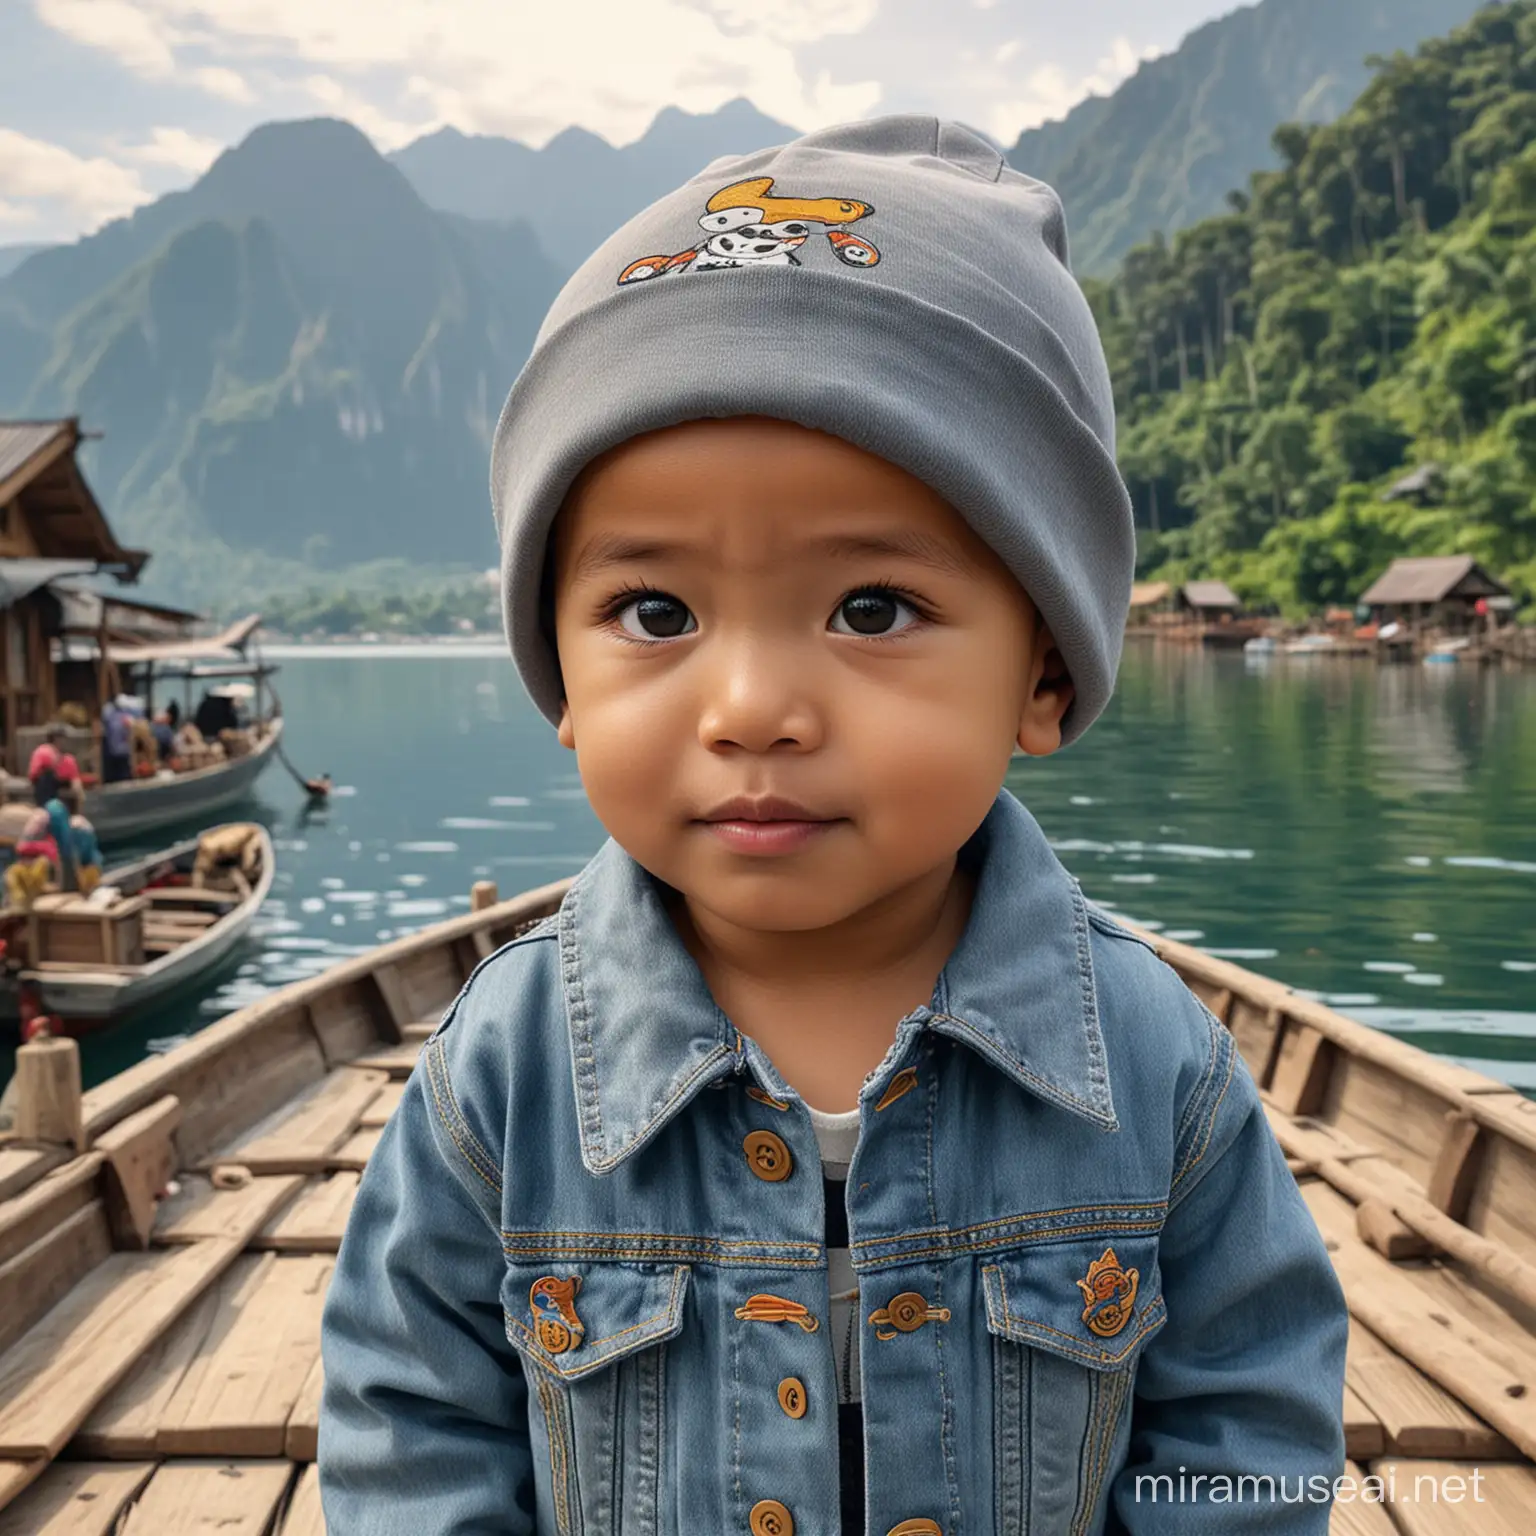 Handsome Indonesian Boy in Beanie on Wooden Boat